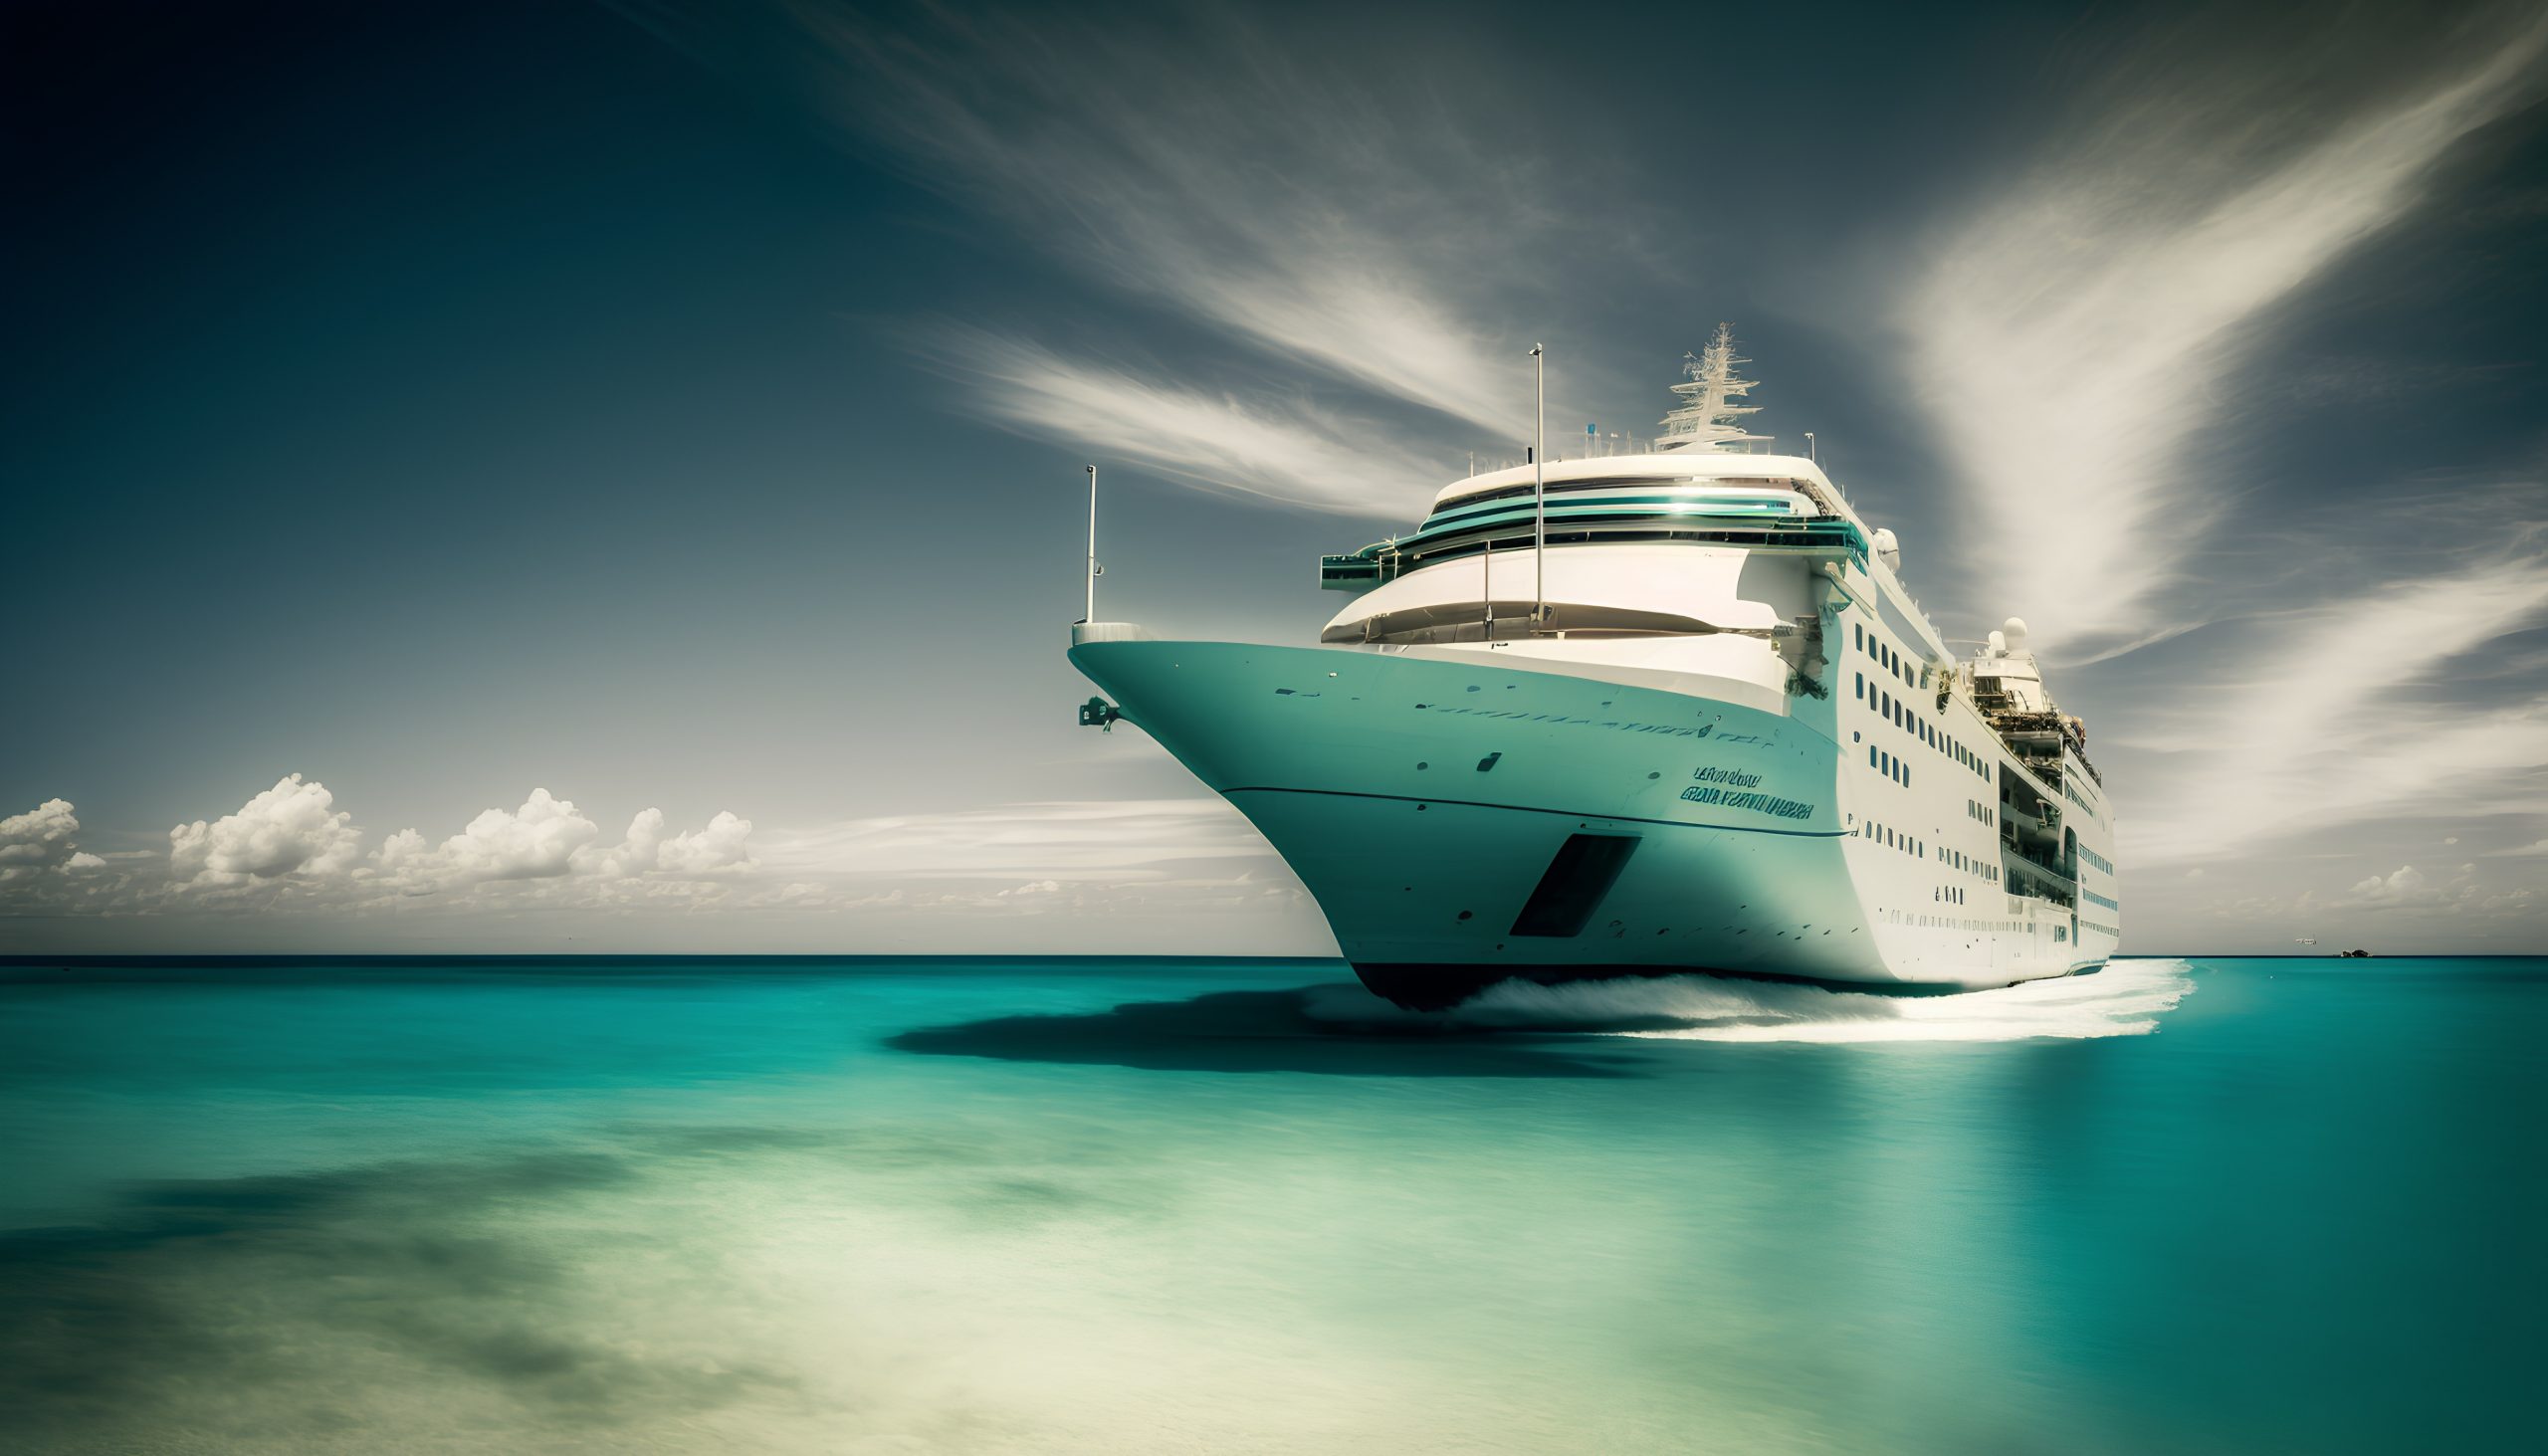 10 Things To “Make Sure” You Are Cruise Ready